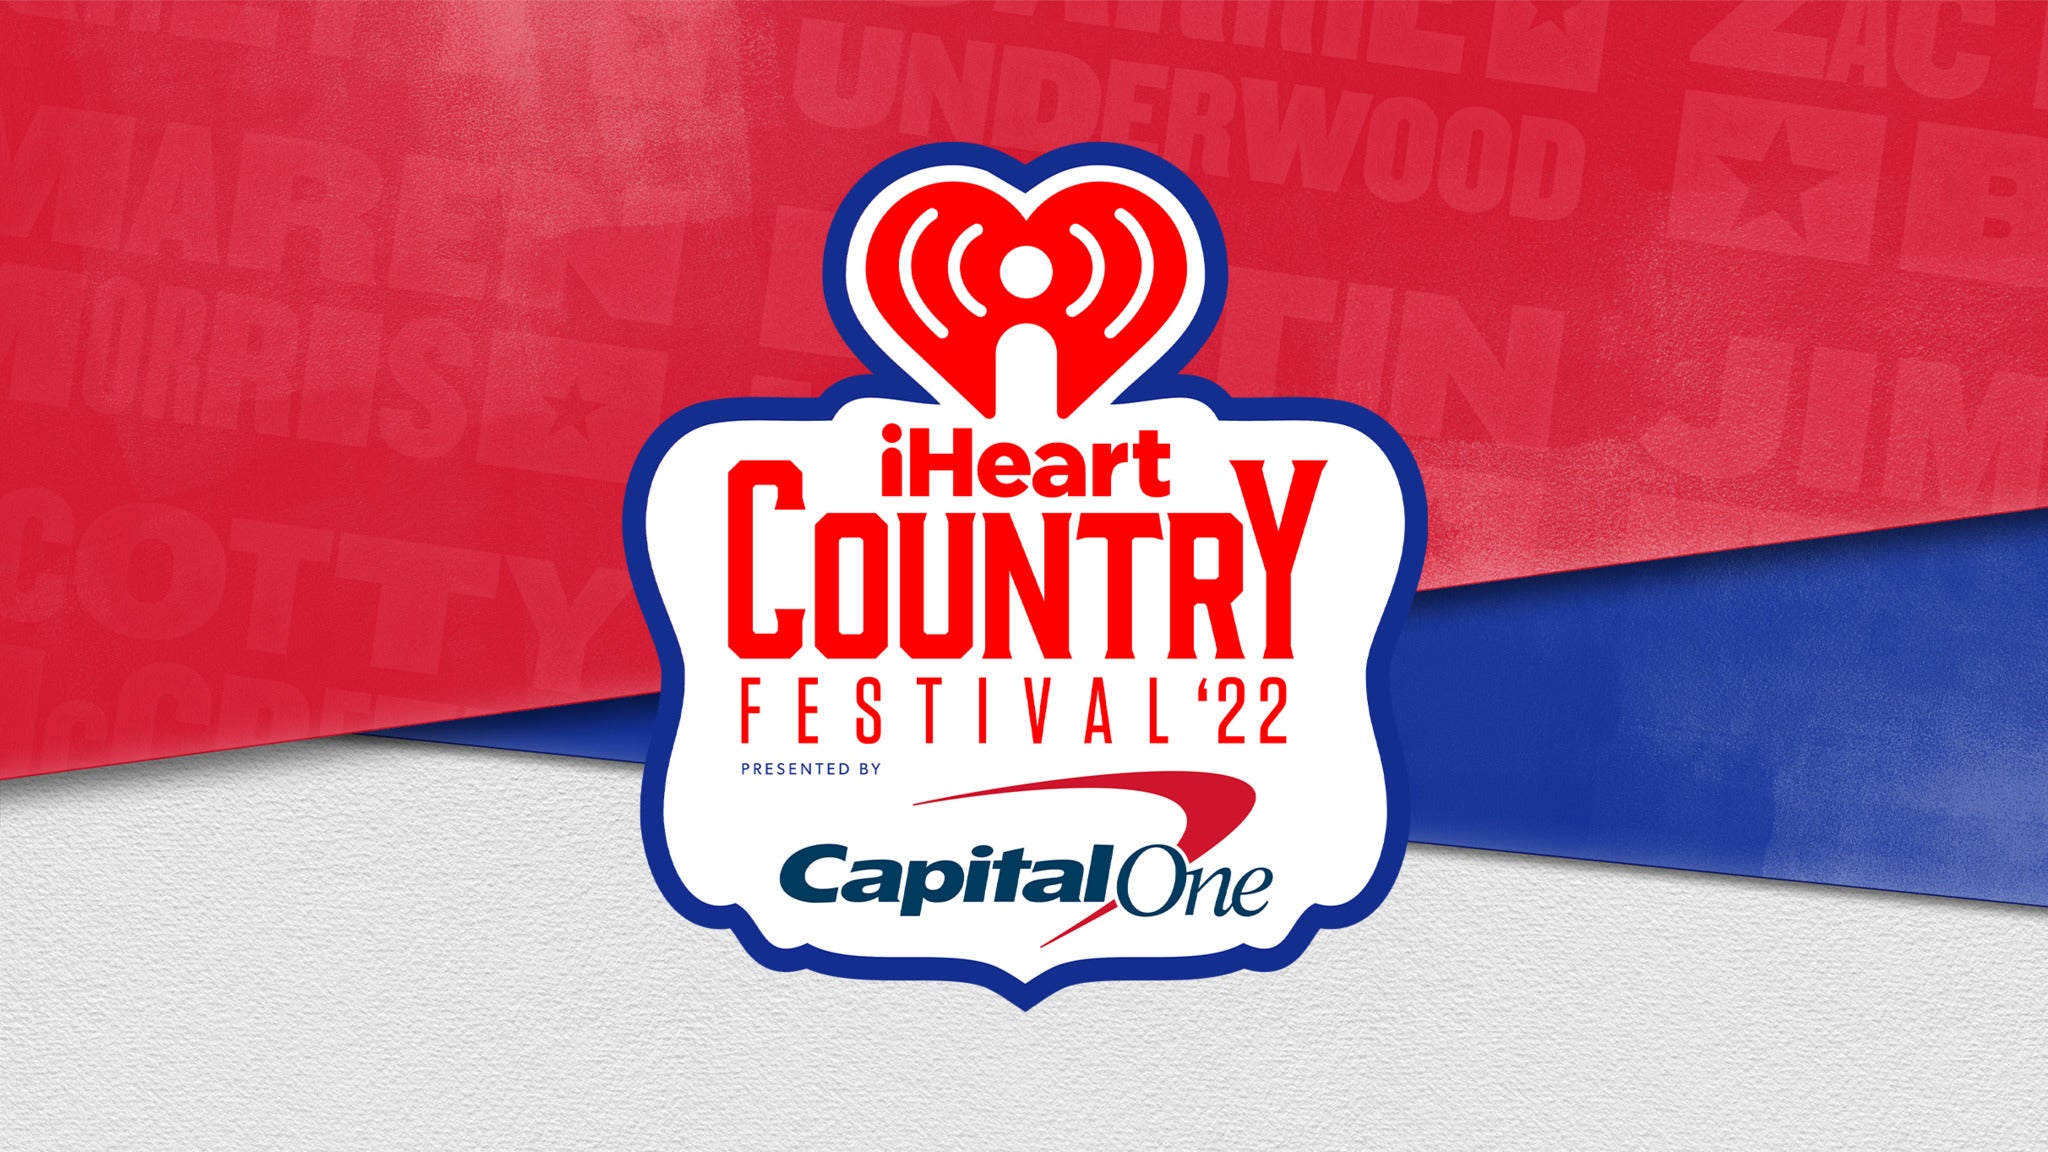 WiseGuys iHeartCountry Festival Presented by Capital One at Moody